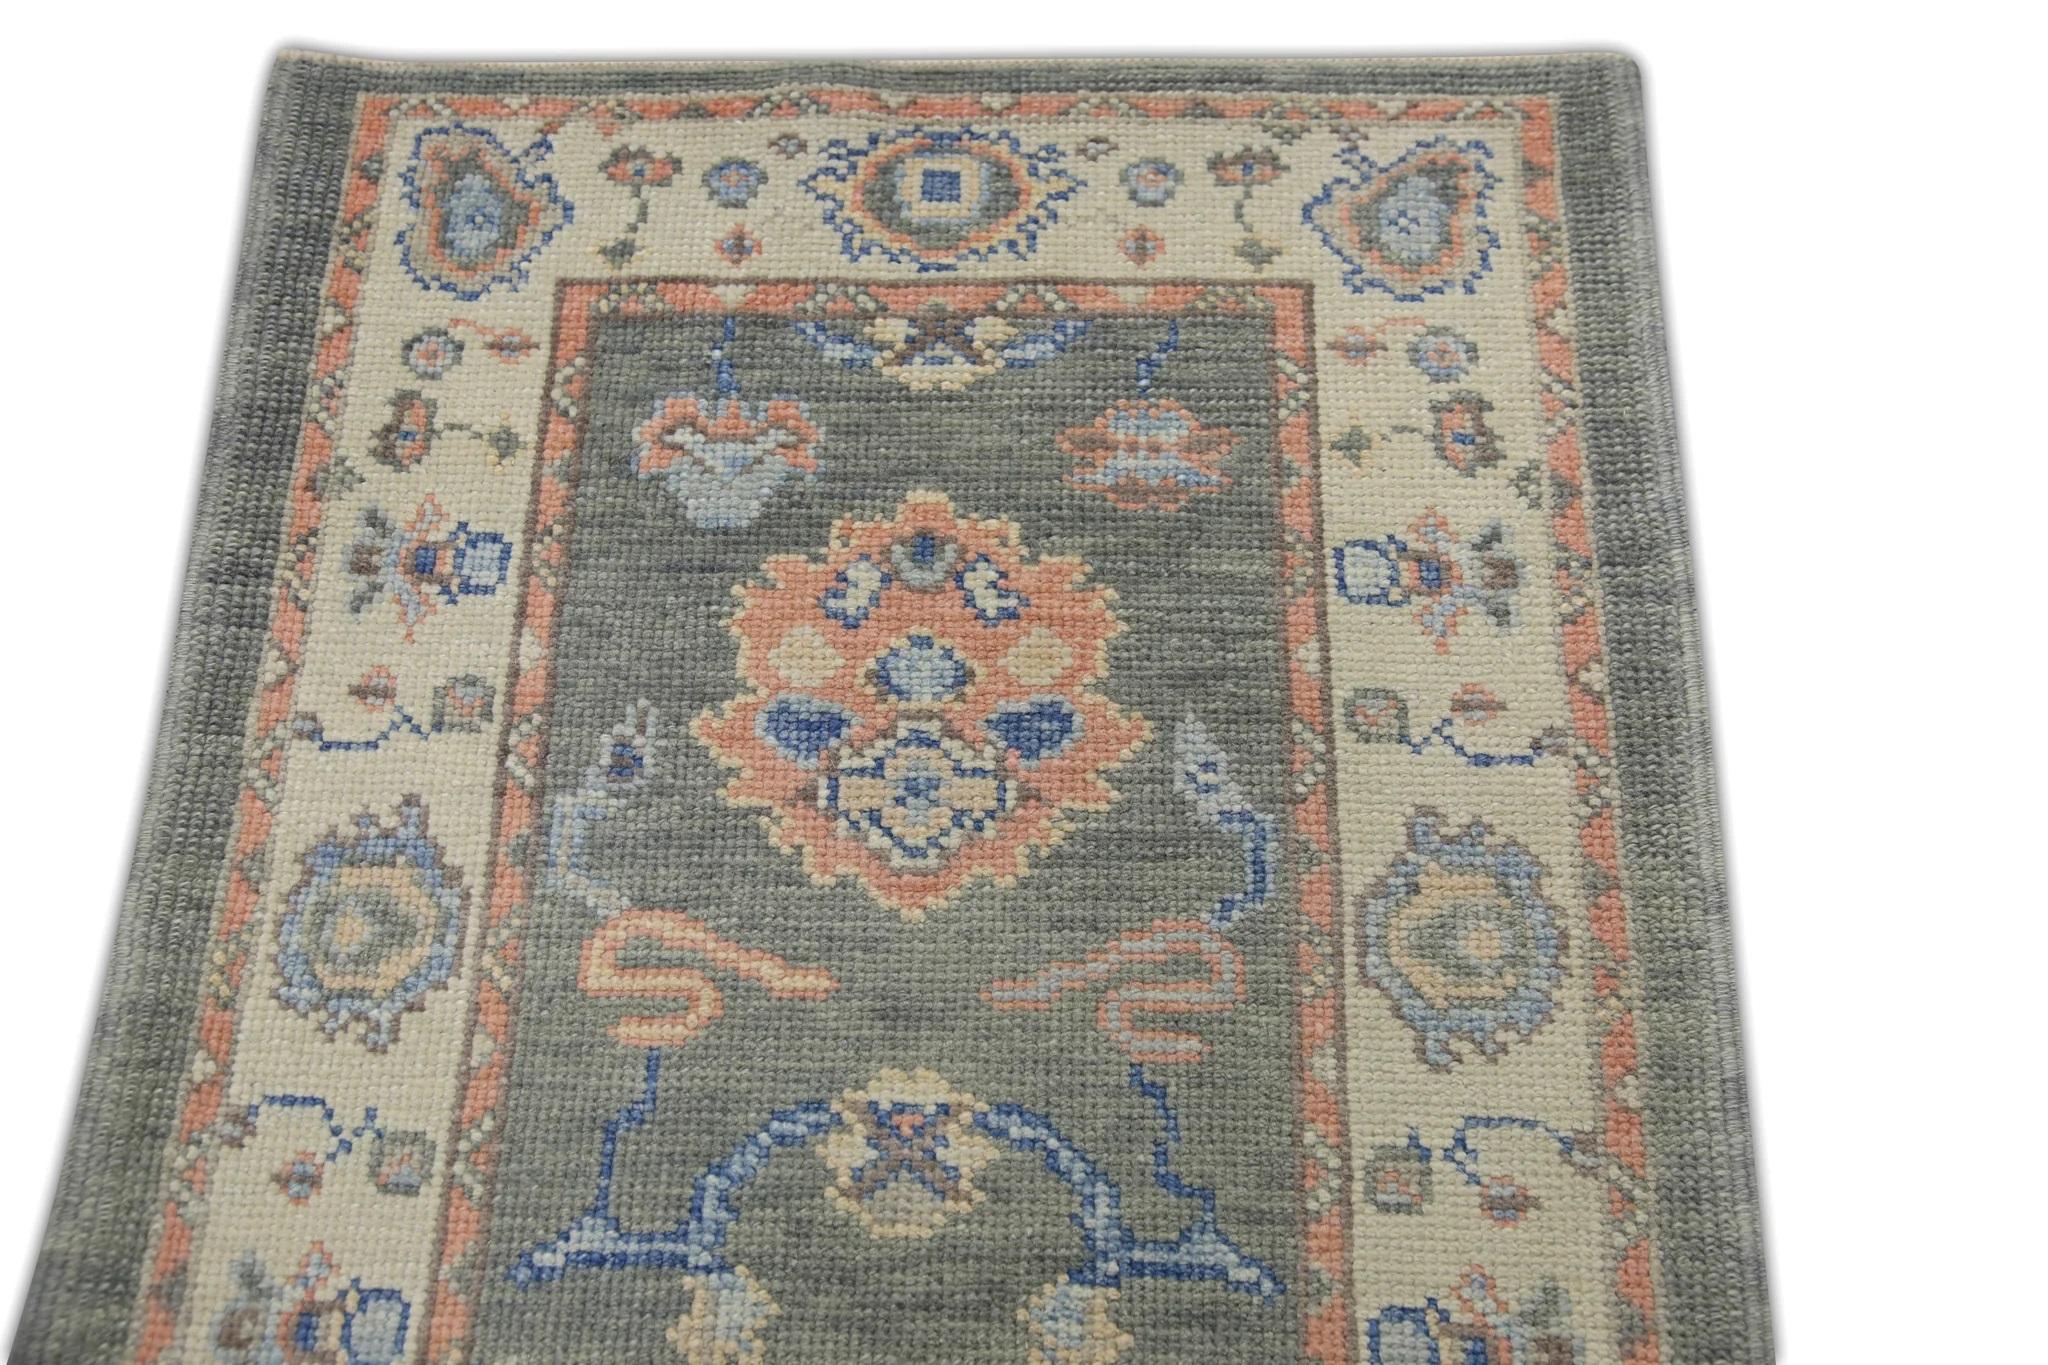 Vegetable Dyed Gray Handwoven Wool Turkish Oushak Rug in Pink & Blue Floral Design 2'7